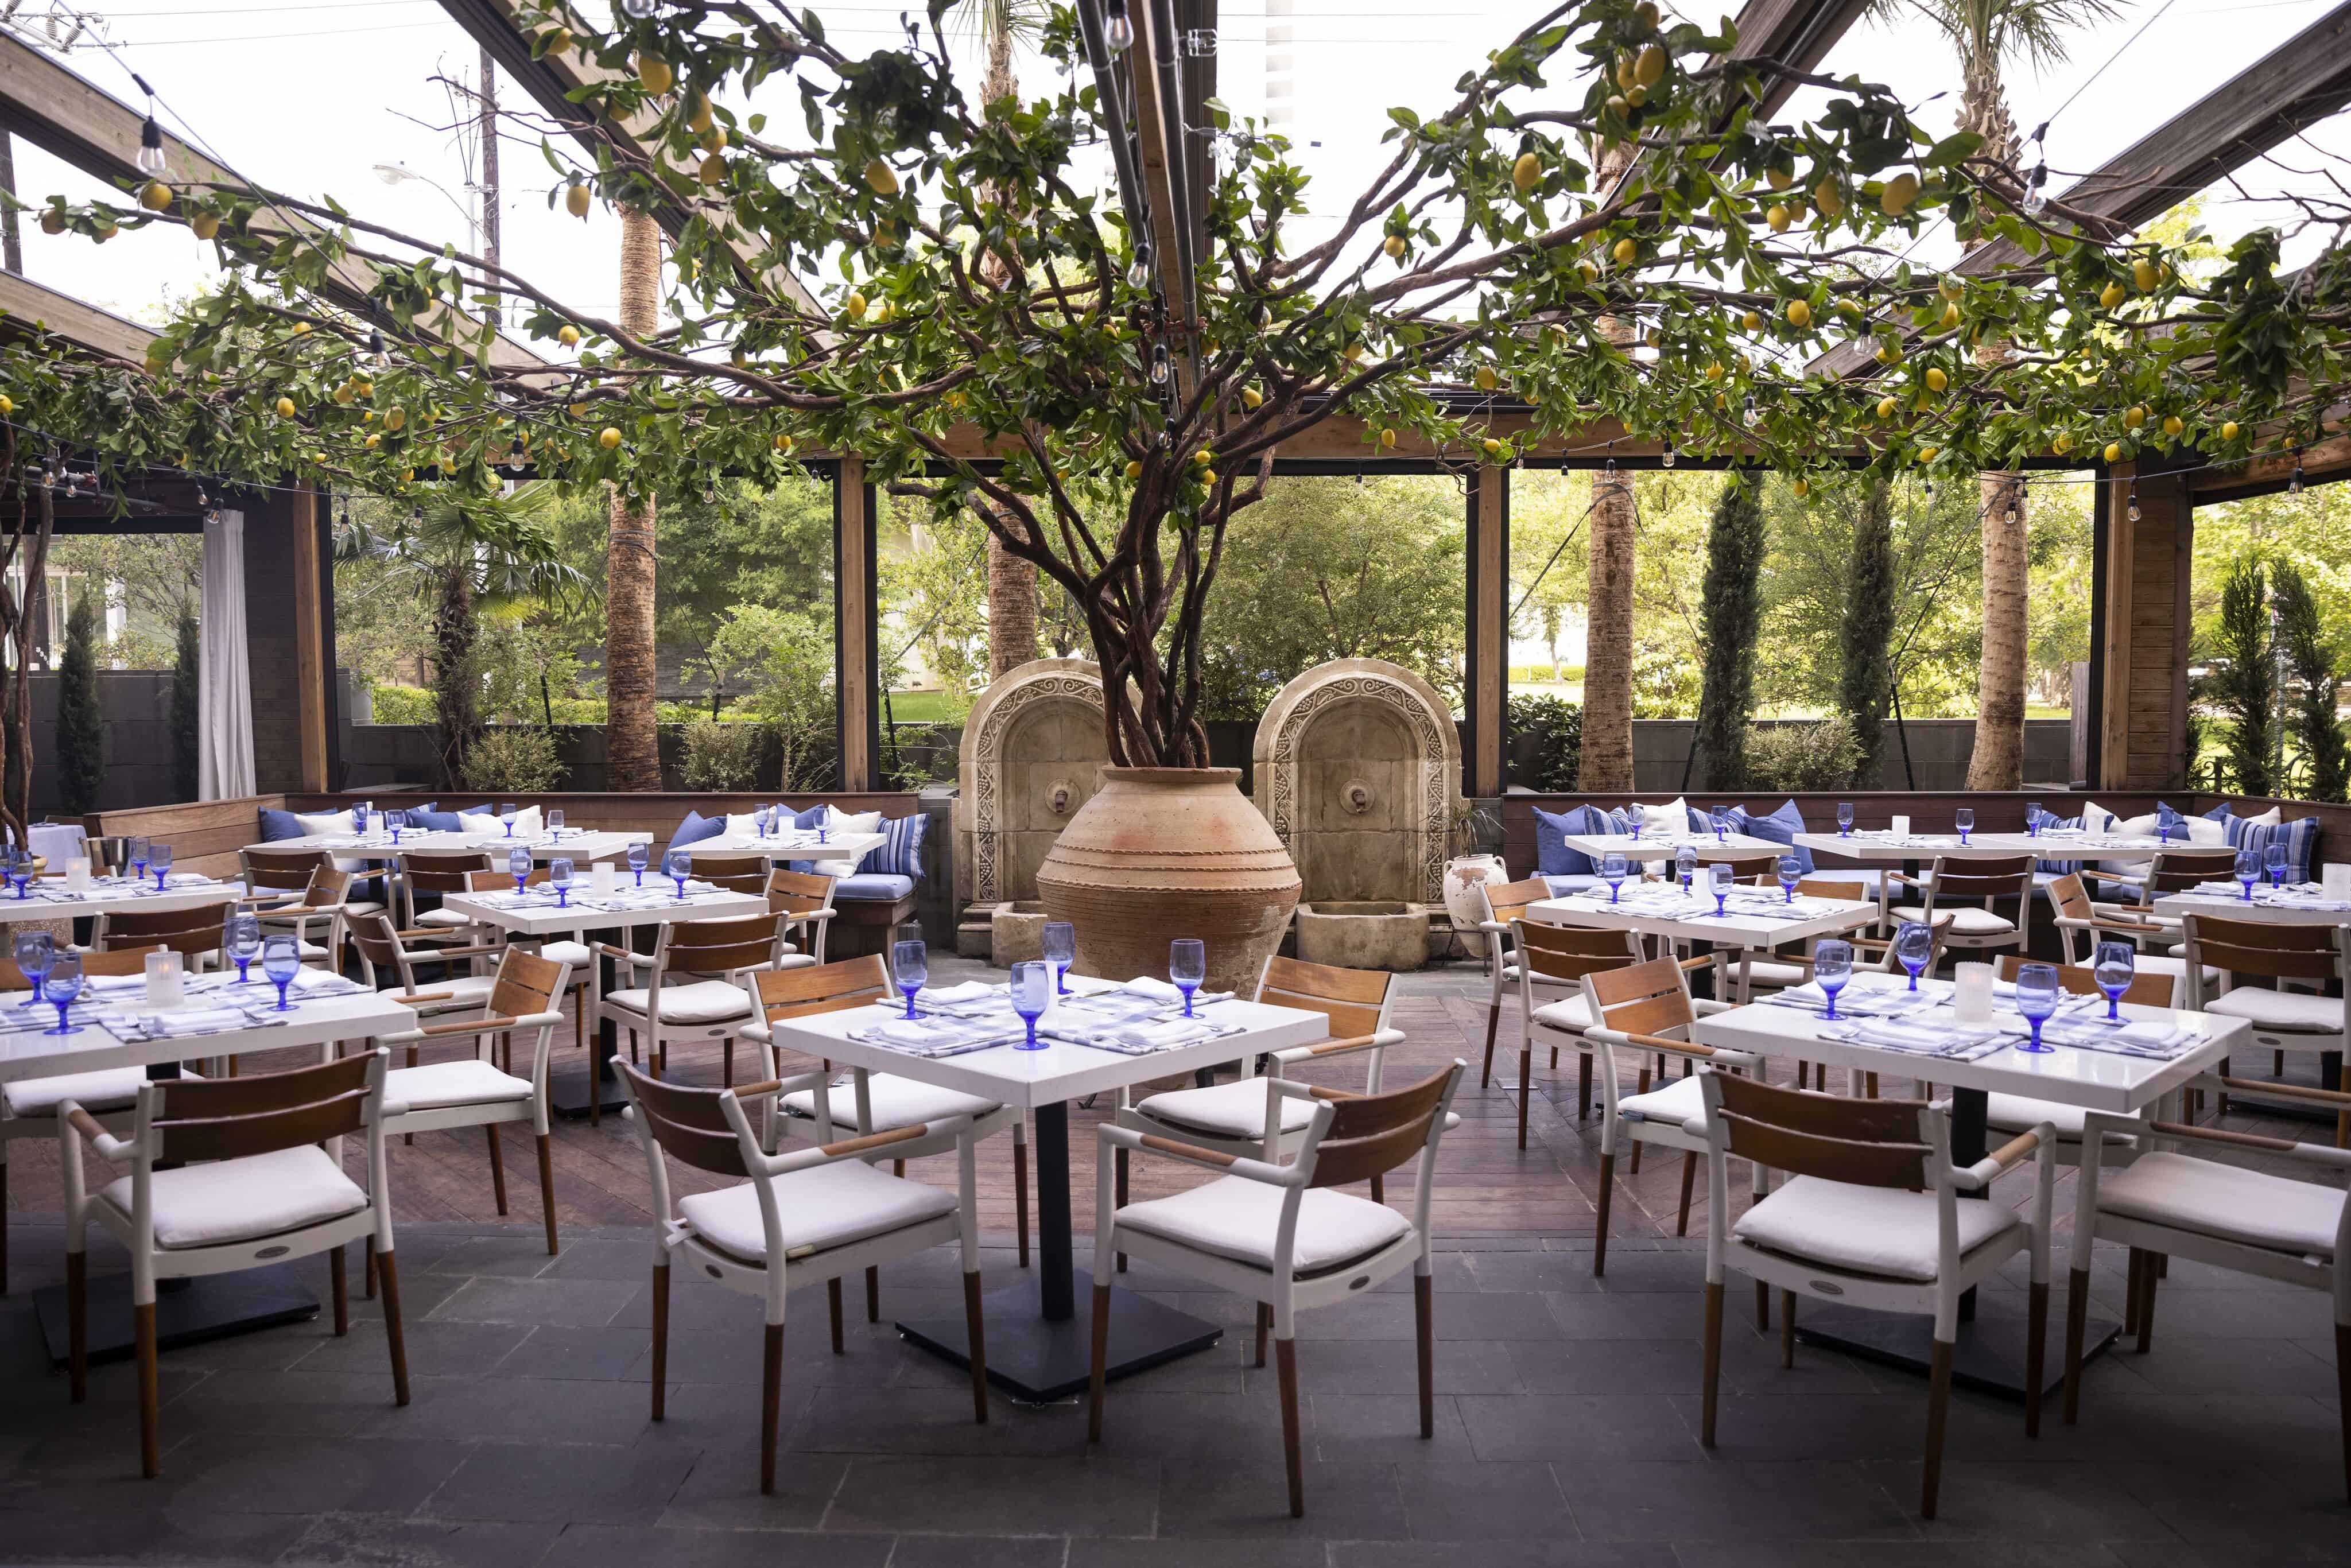 Patio at Dolce Riviera with a faux lemon tree. | Image by Juan Figueroa, The Dallas Morning News